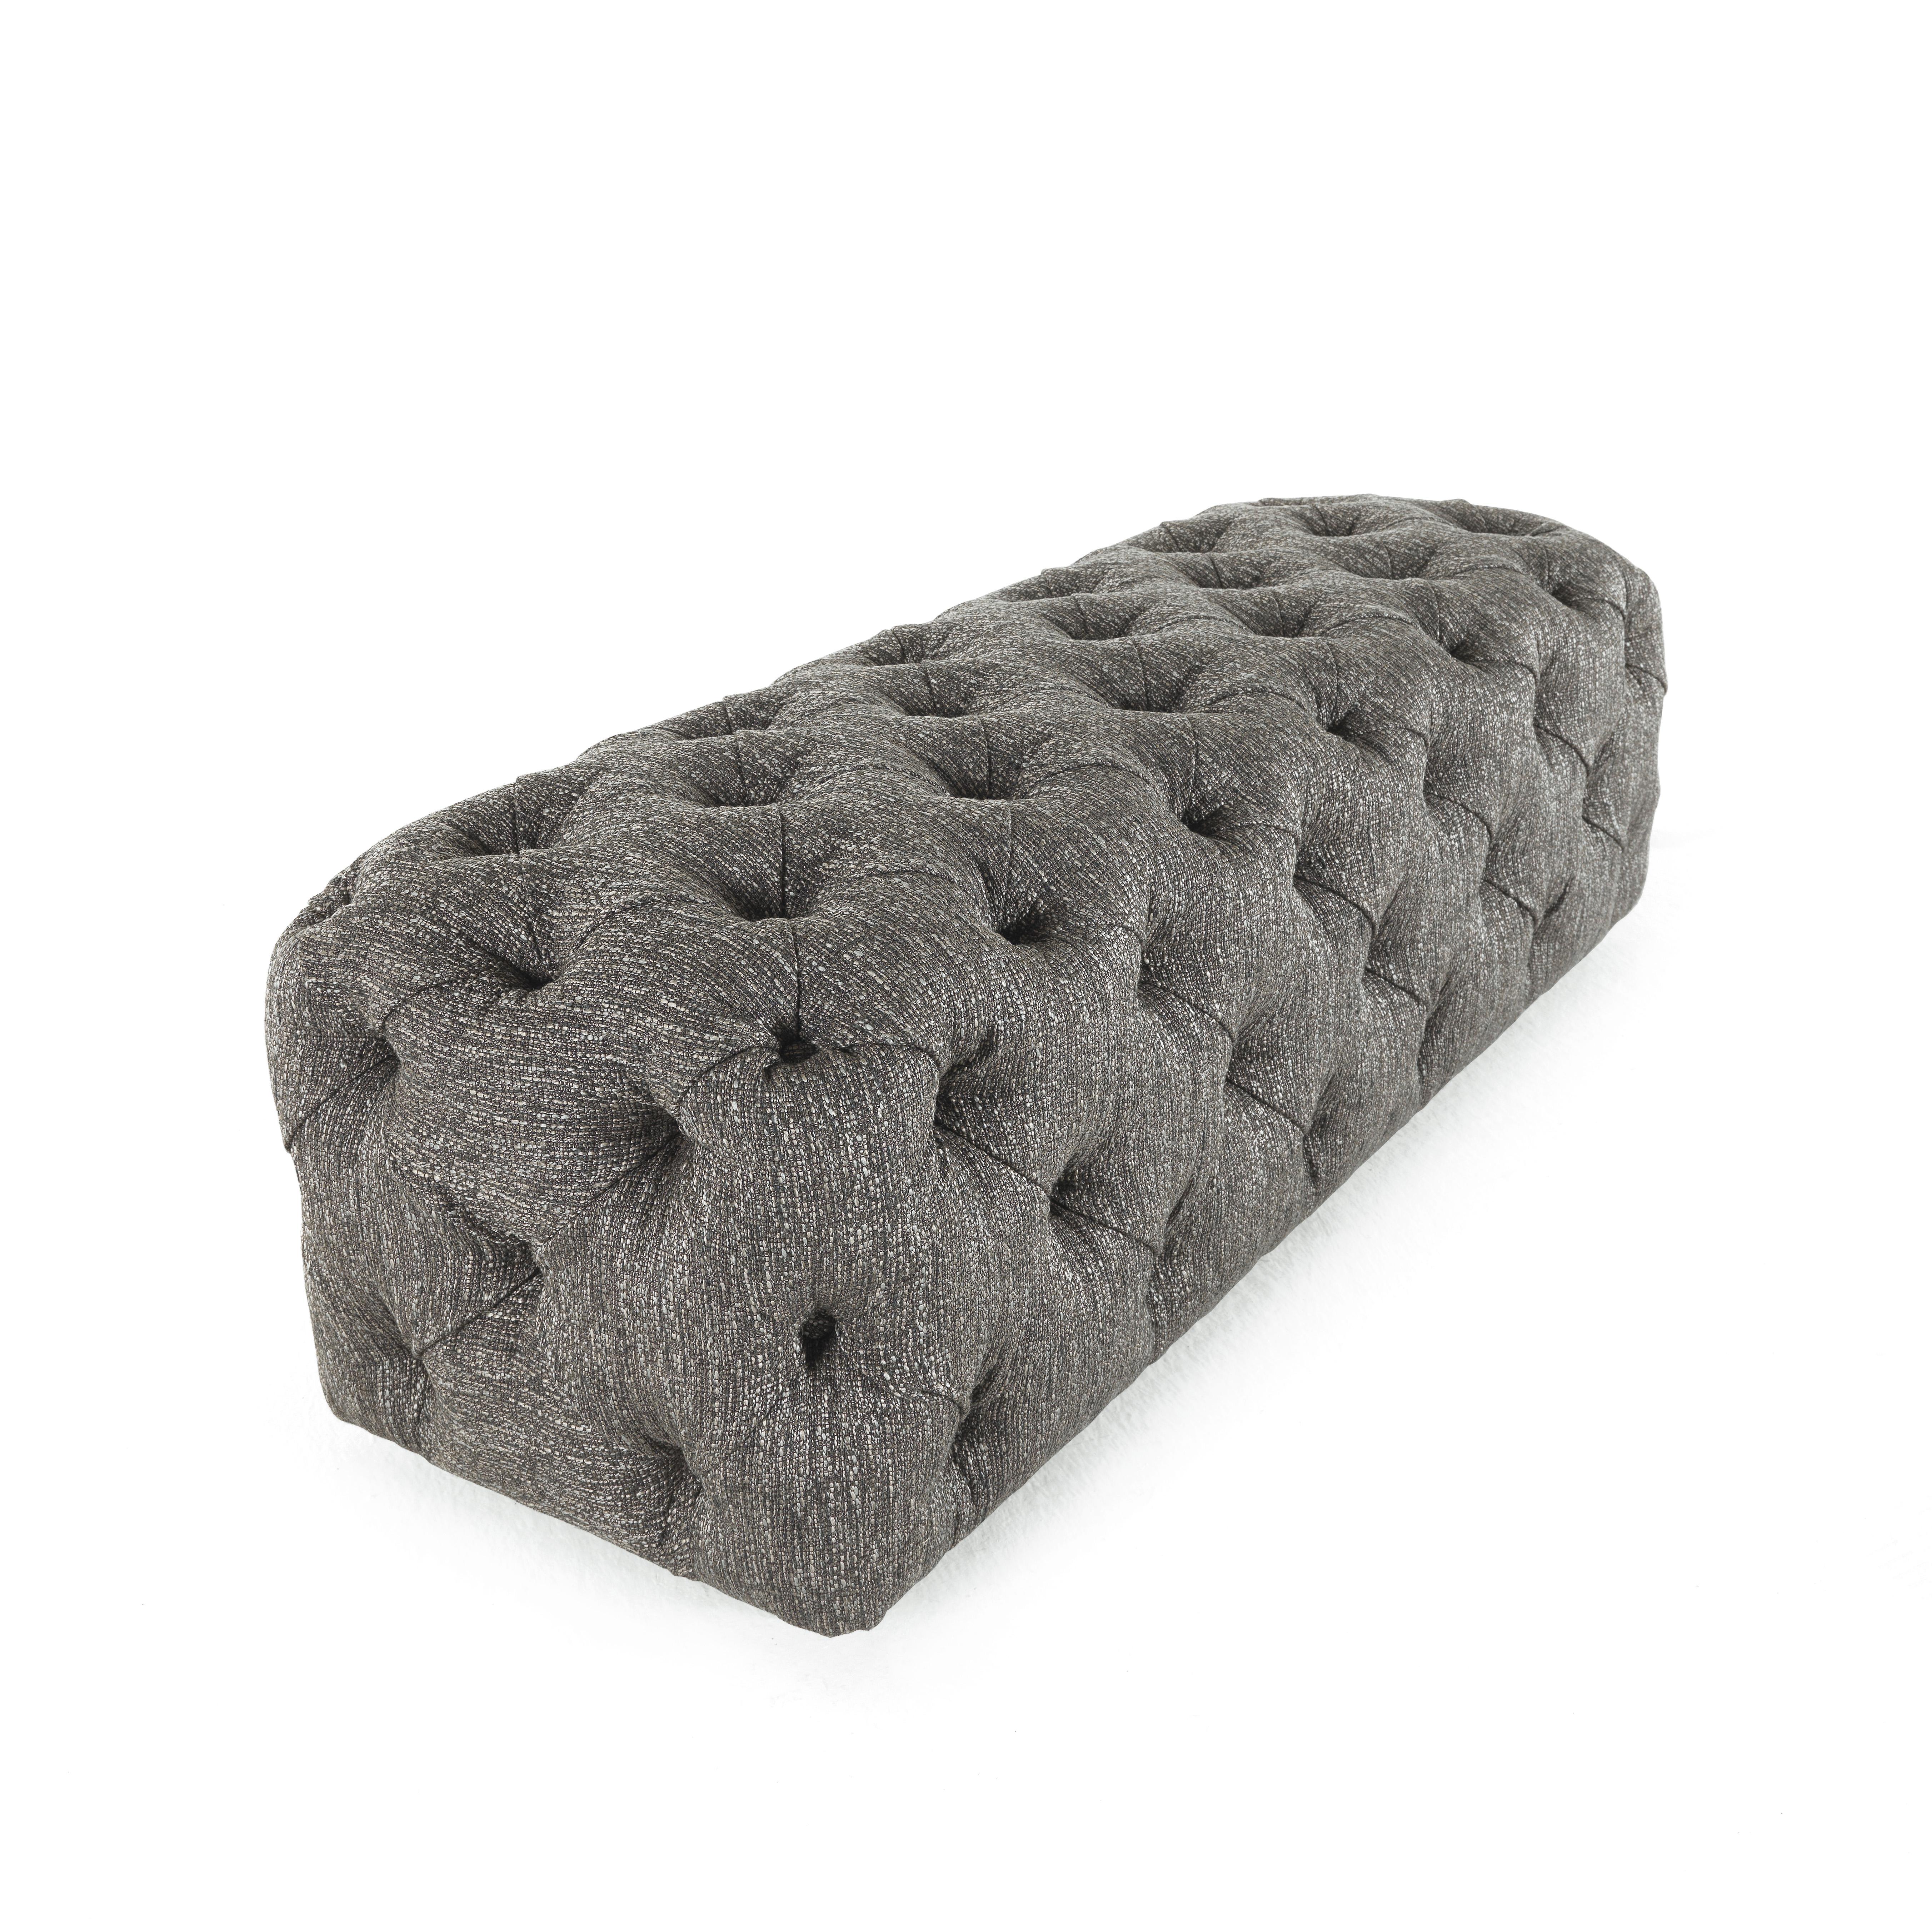 Modern 21st Century King's Cross Rectangular Pouf in Fabric by Gianfranco Ferré Home For Sale